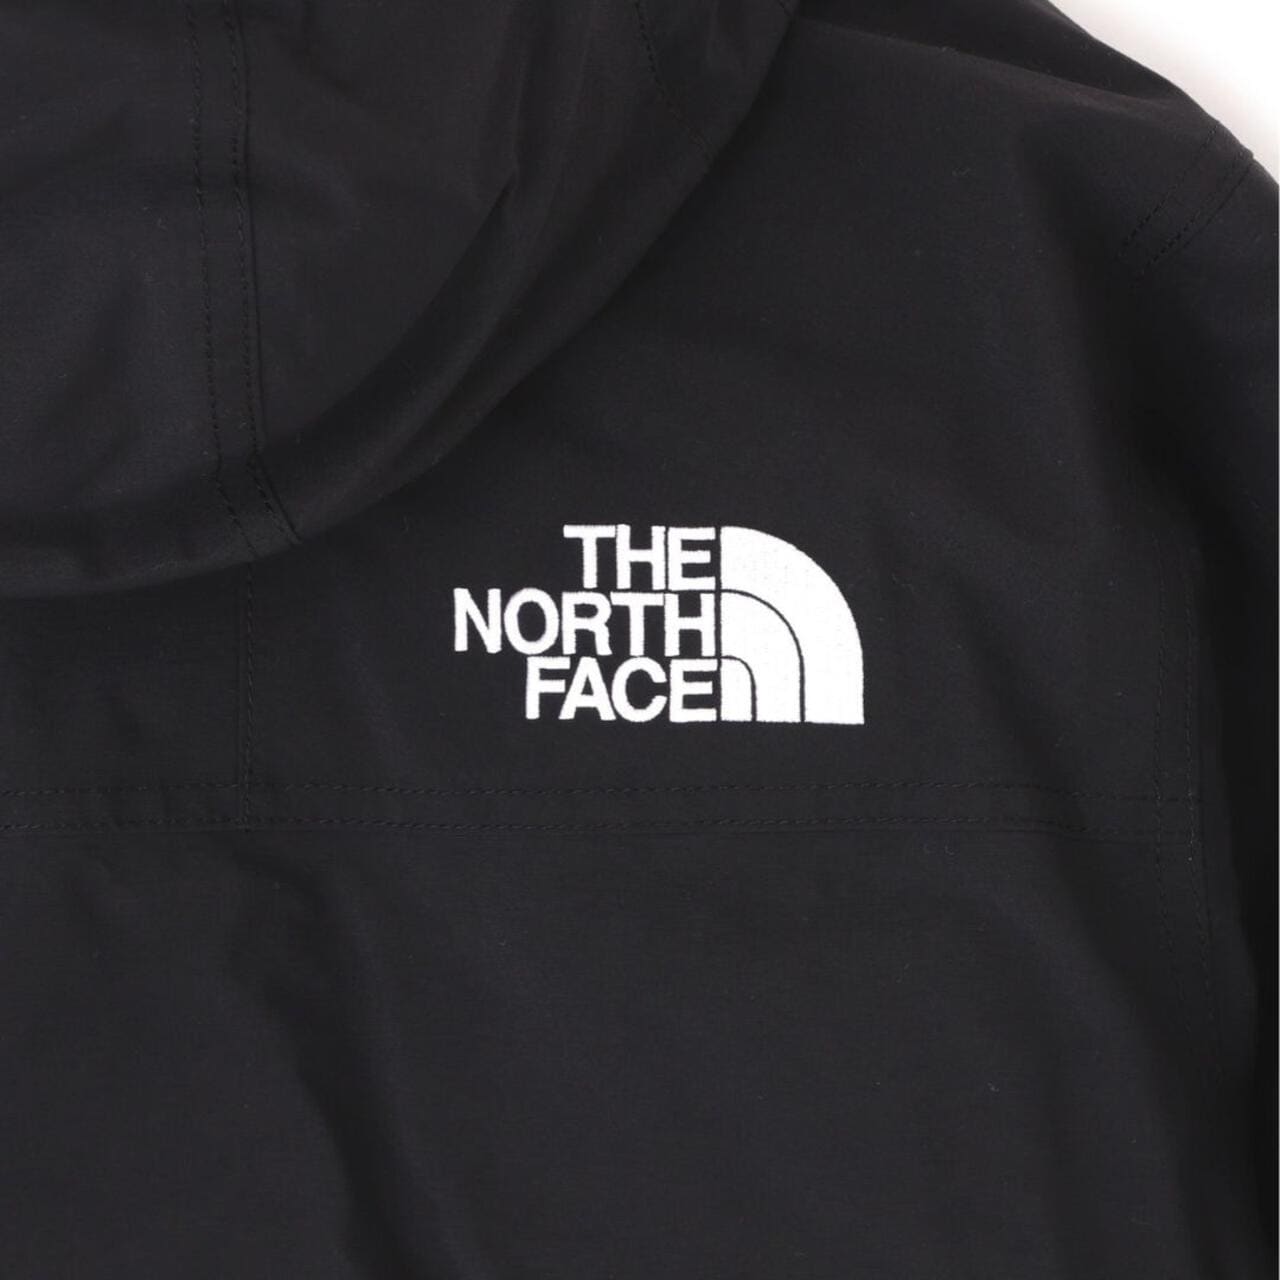 THE NORTH FACE (ザ・ノースフェイス）Mountain Down Jacket 